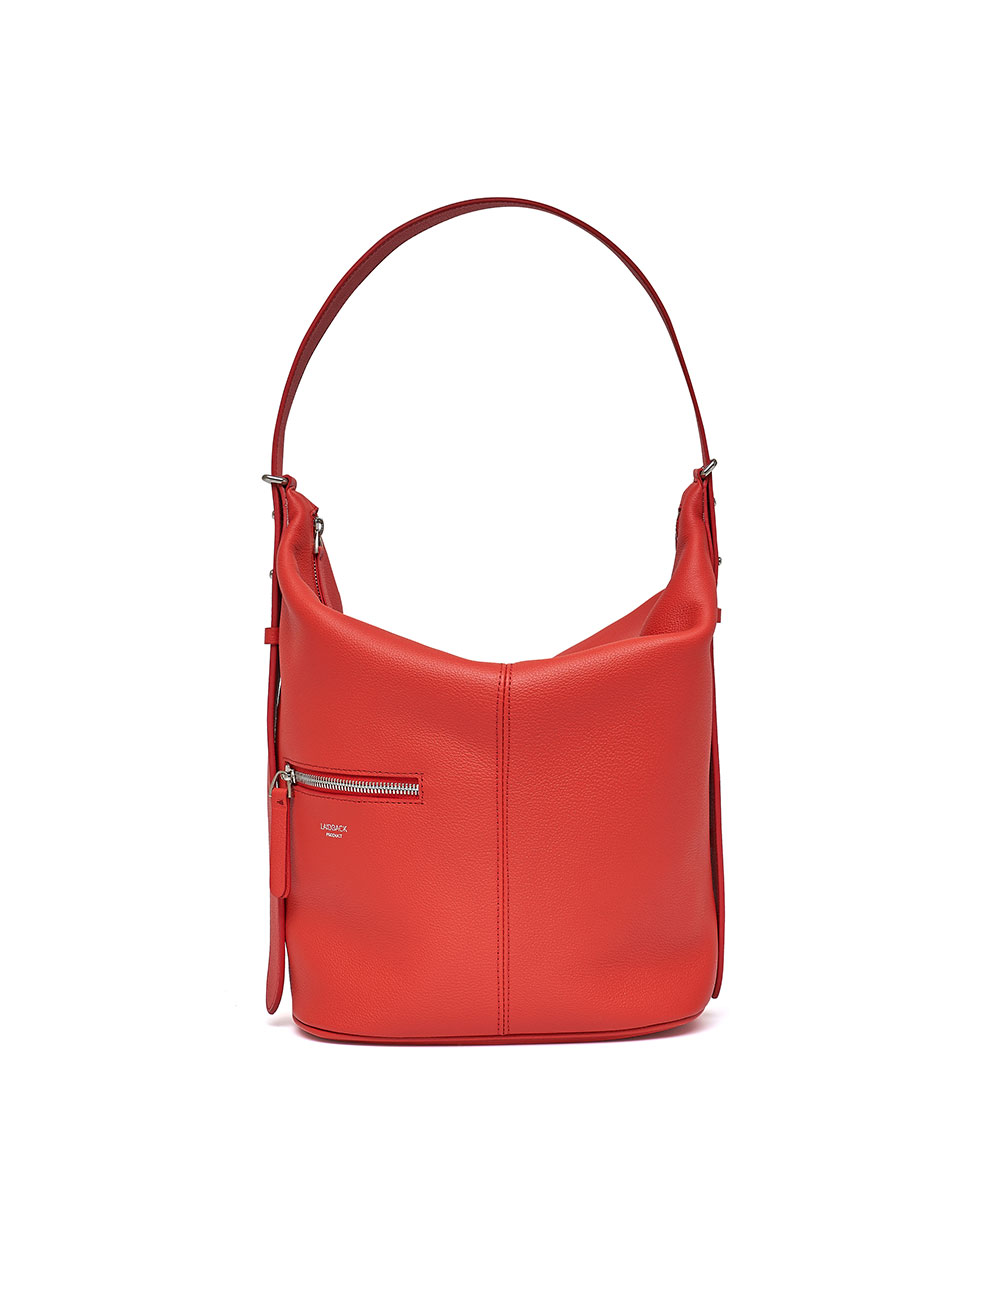 HAVE bag / red